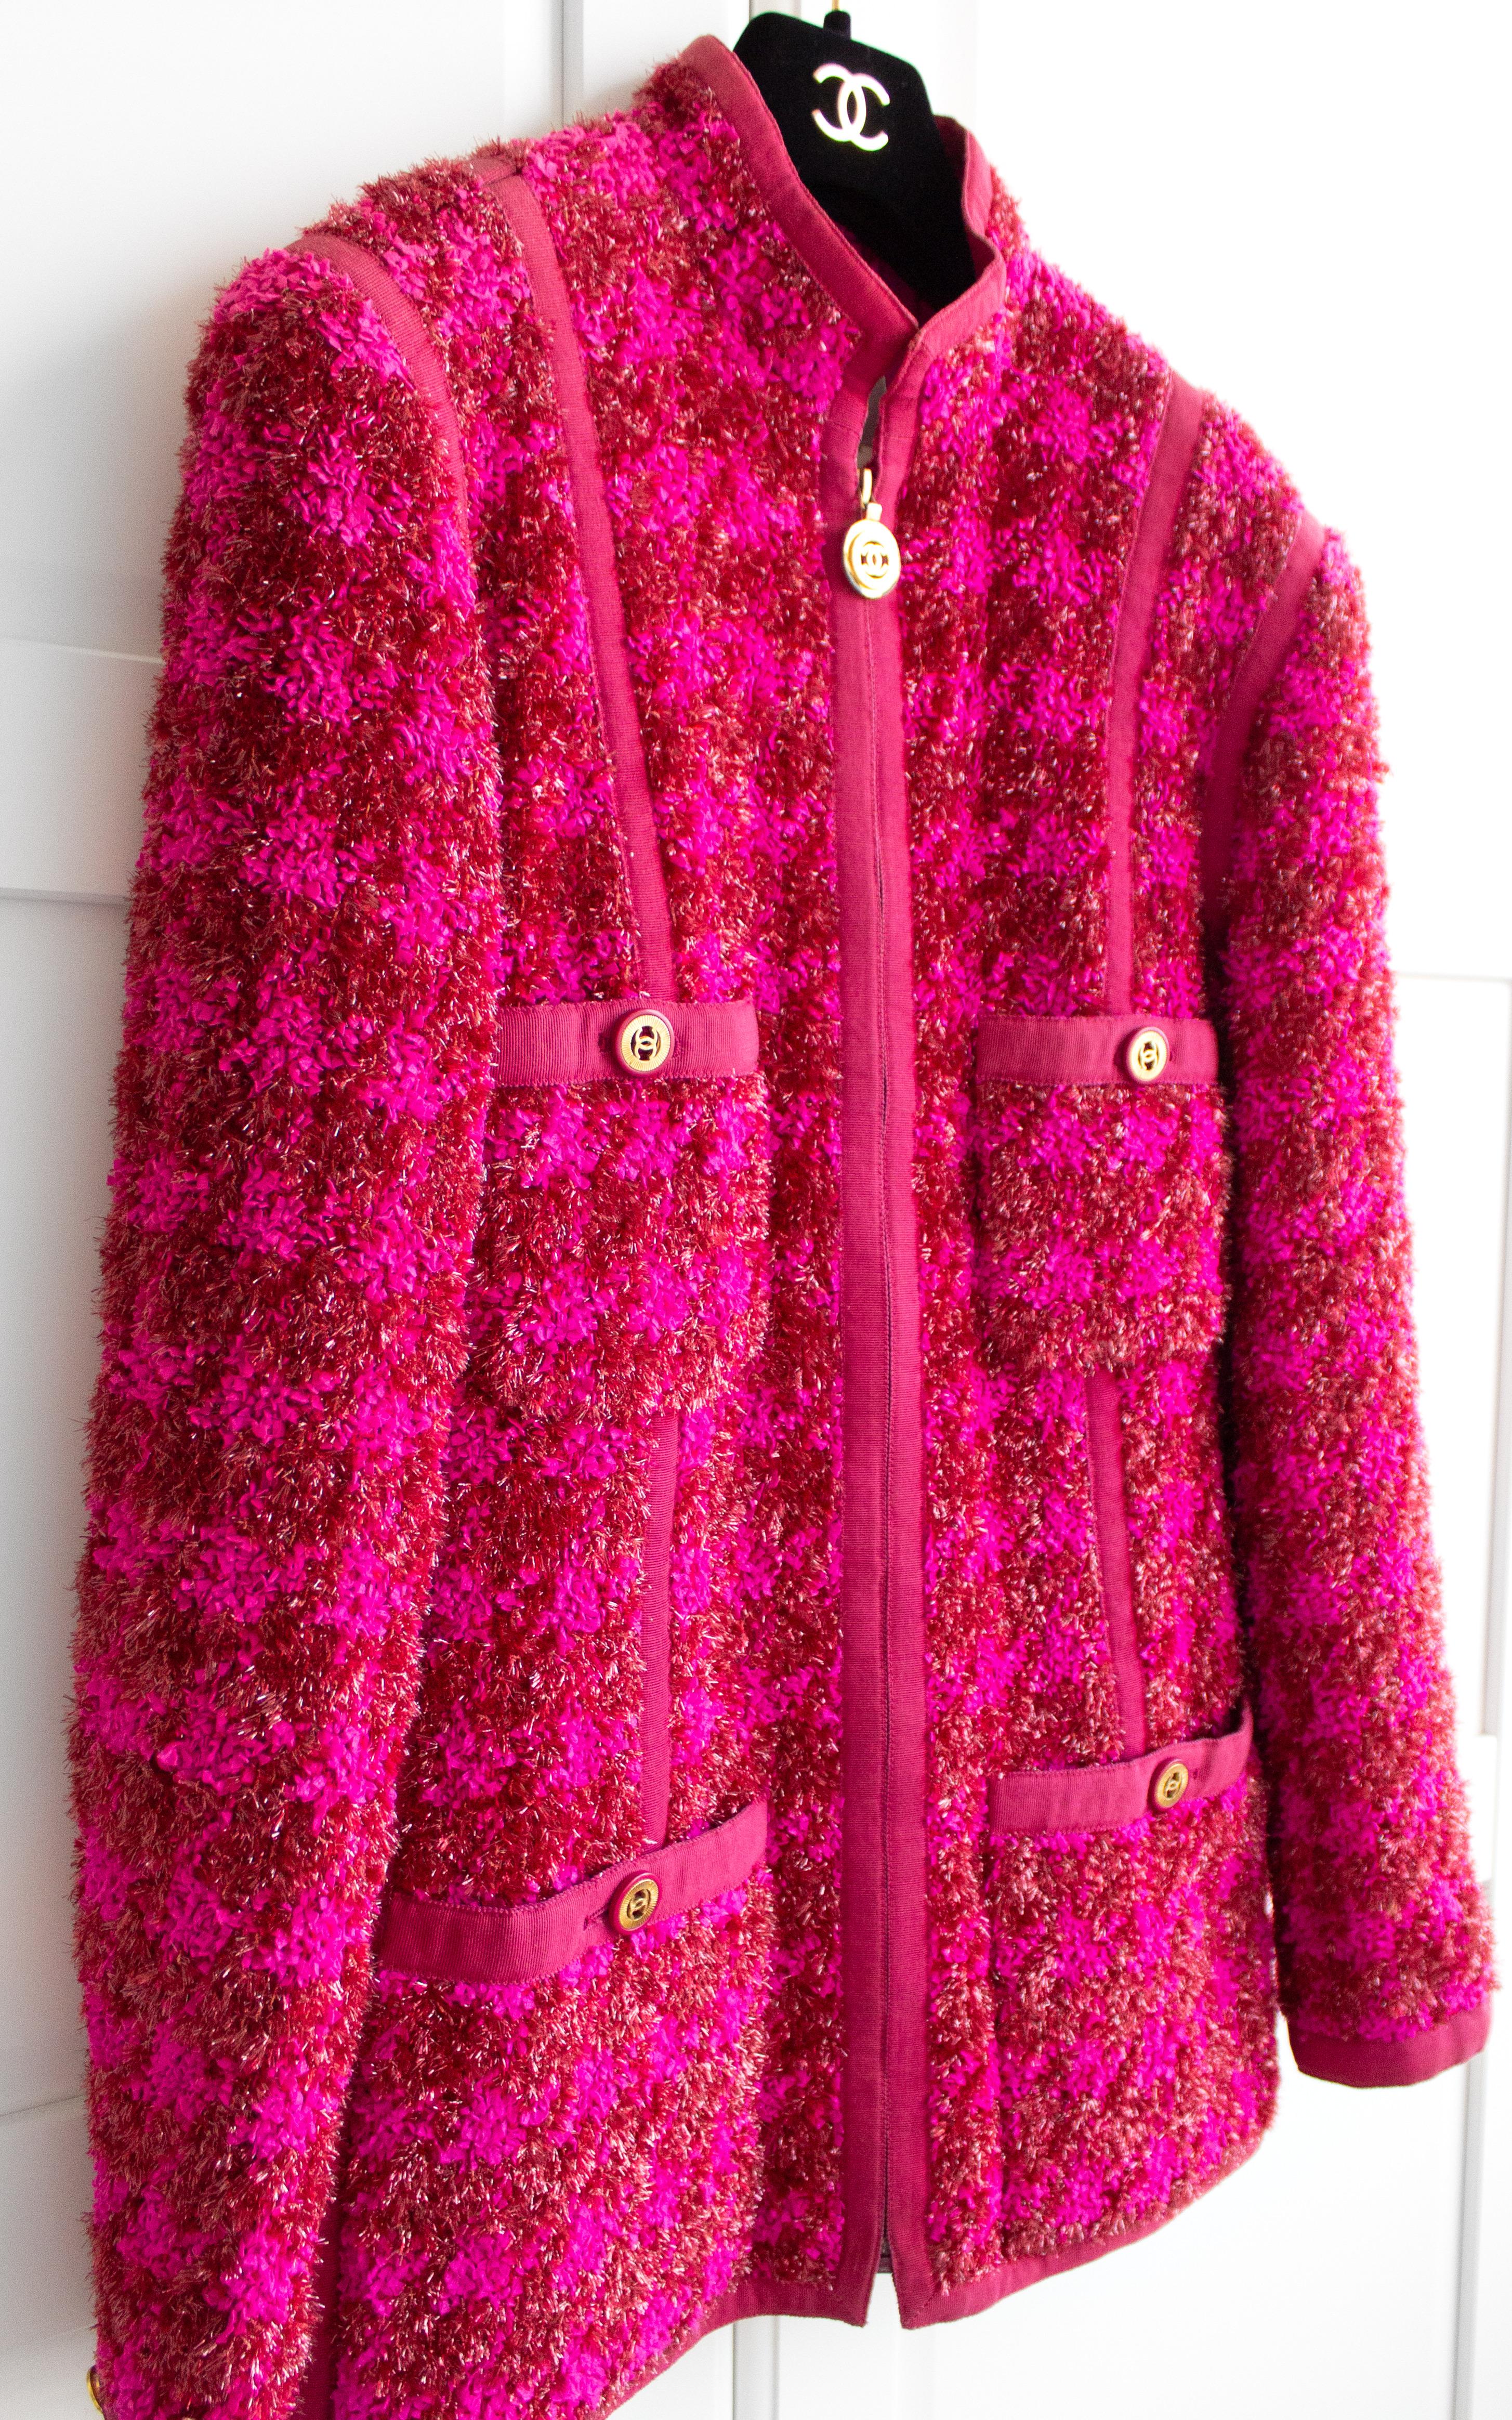 Women's Chanel Vintage F/W 1991 Fuchsia Pink Gold CC Shimmer Houndstooth Tweed Jacket